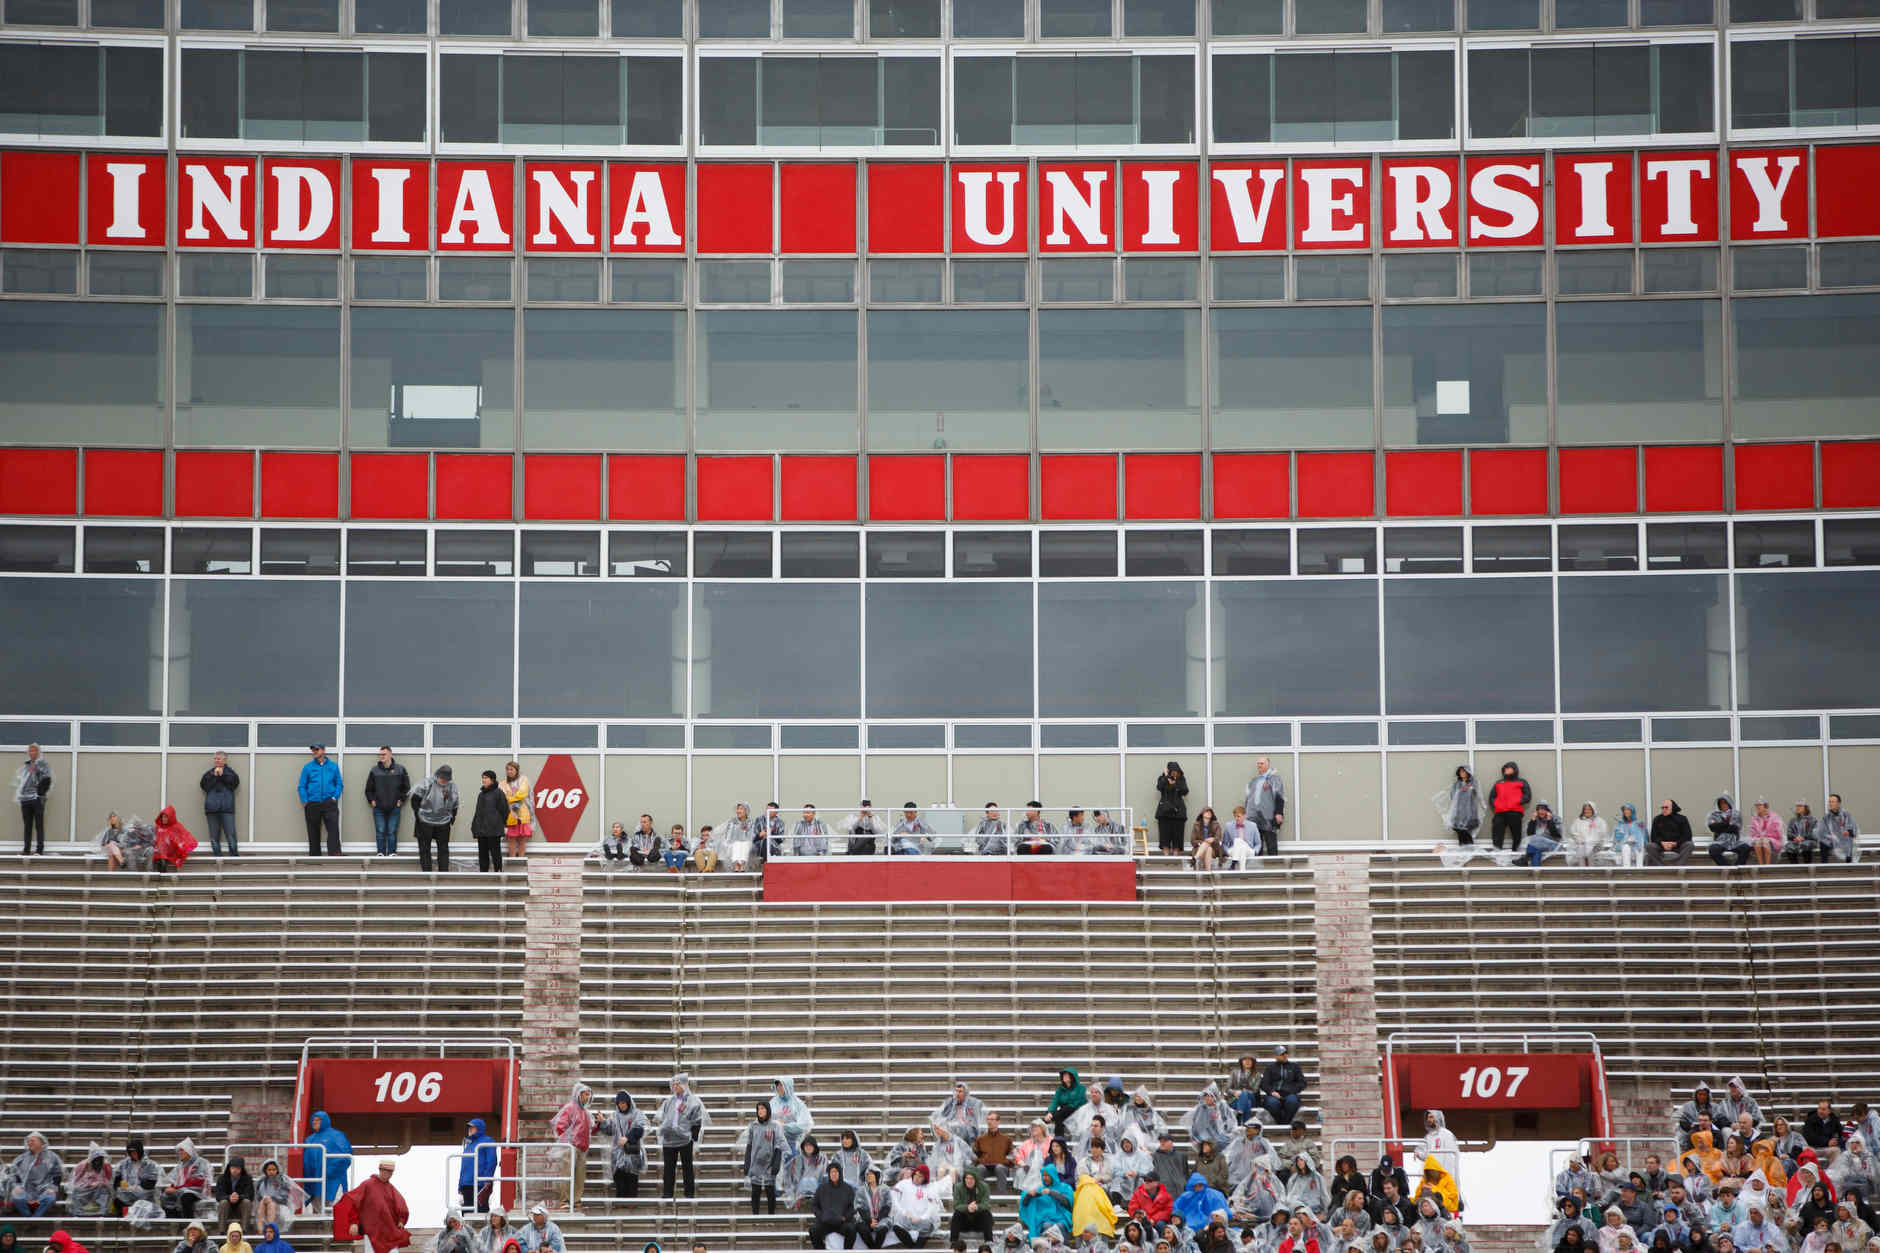 Audience members watch from the stands during the Indiana University Bloomington Undergraduate Commencement at Memorial Stadium on Saturday, May 4, 2019. (James Brosher/Indiana University)